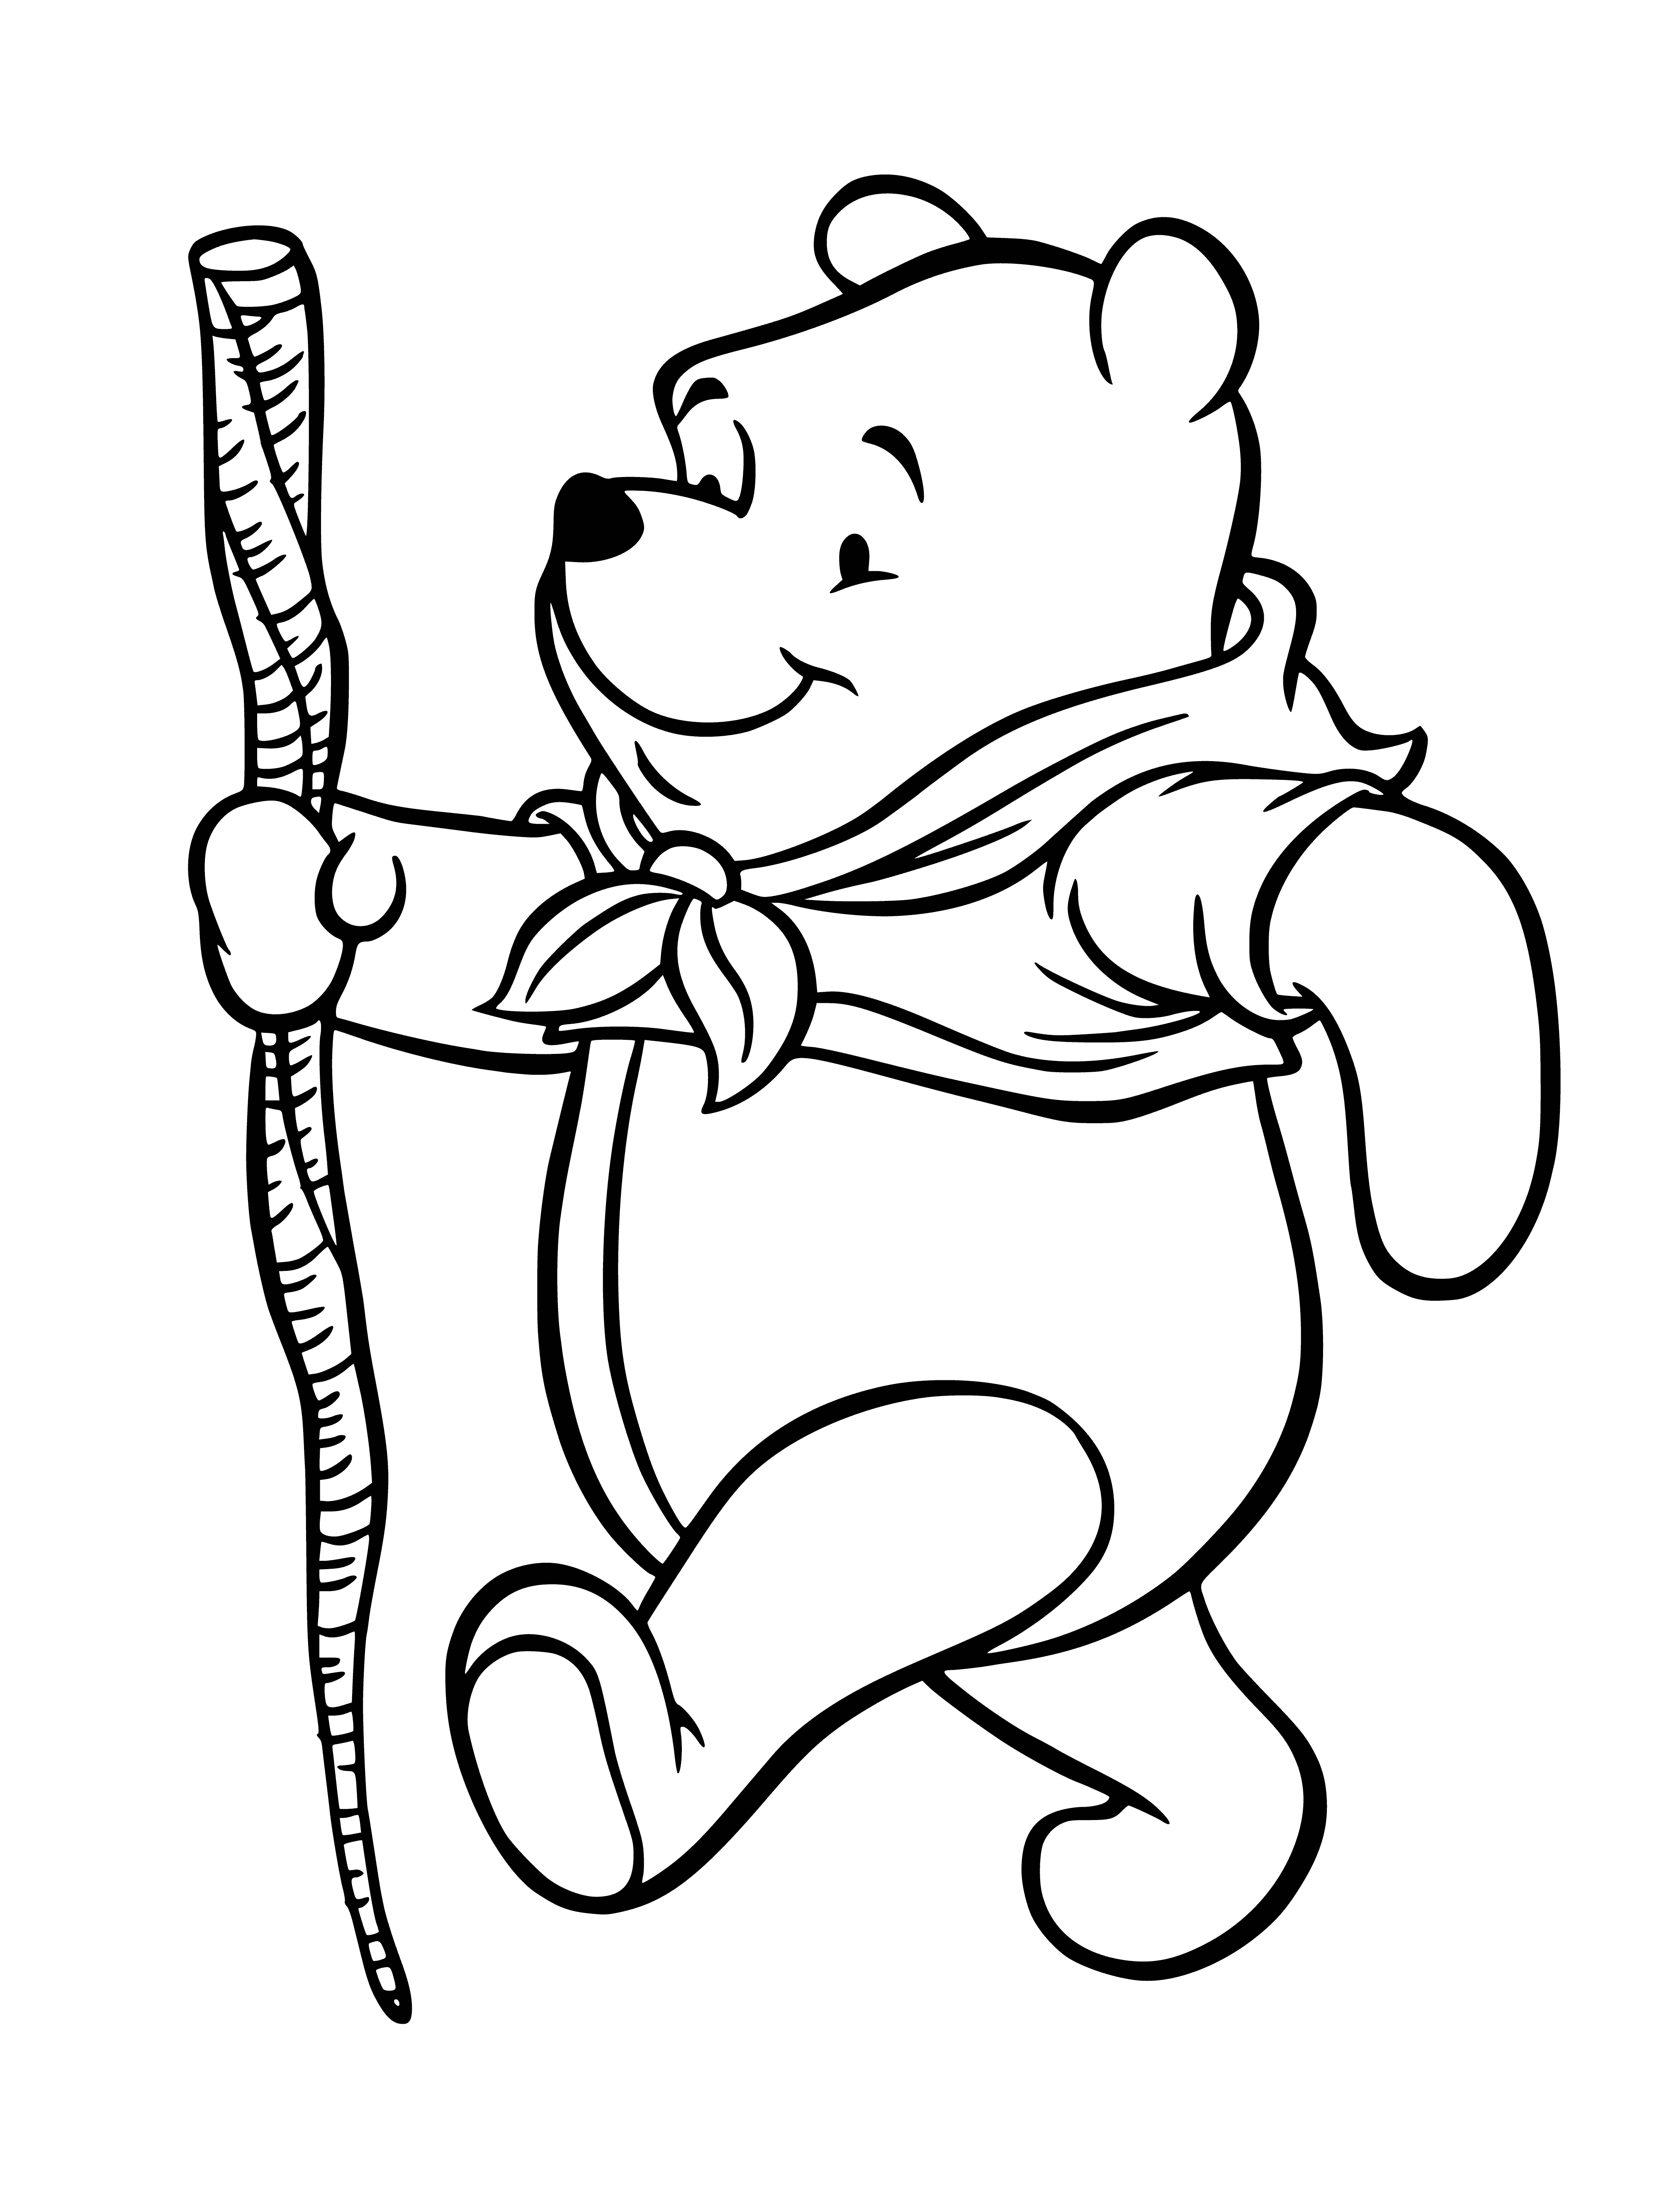 coloring page: Winnie the Pooh walks solemnly up a dirt path, red balloon in hand, with trees on either side and a butterfly nearby. He has a serious demeanor.